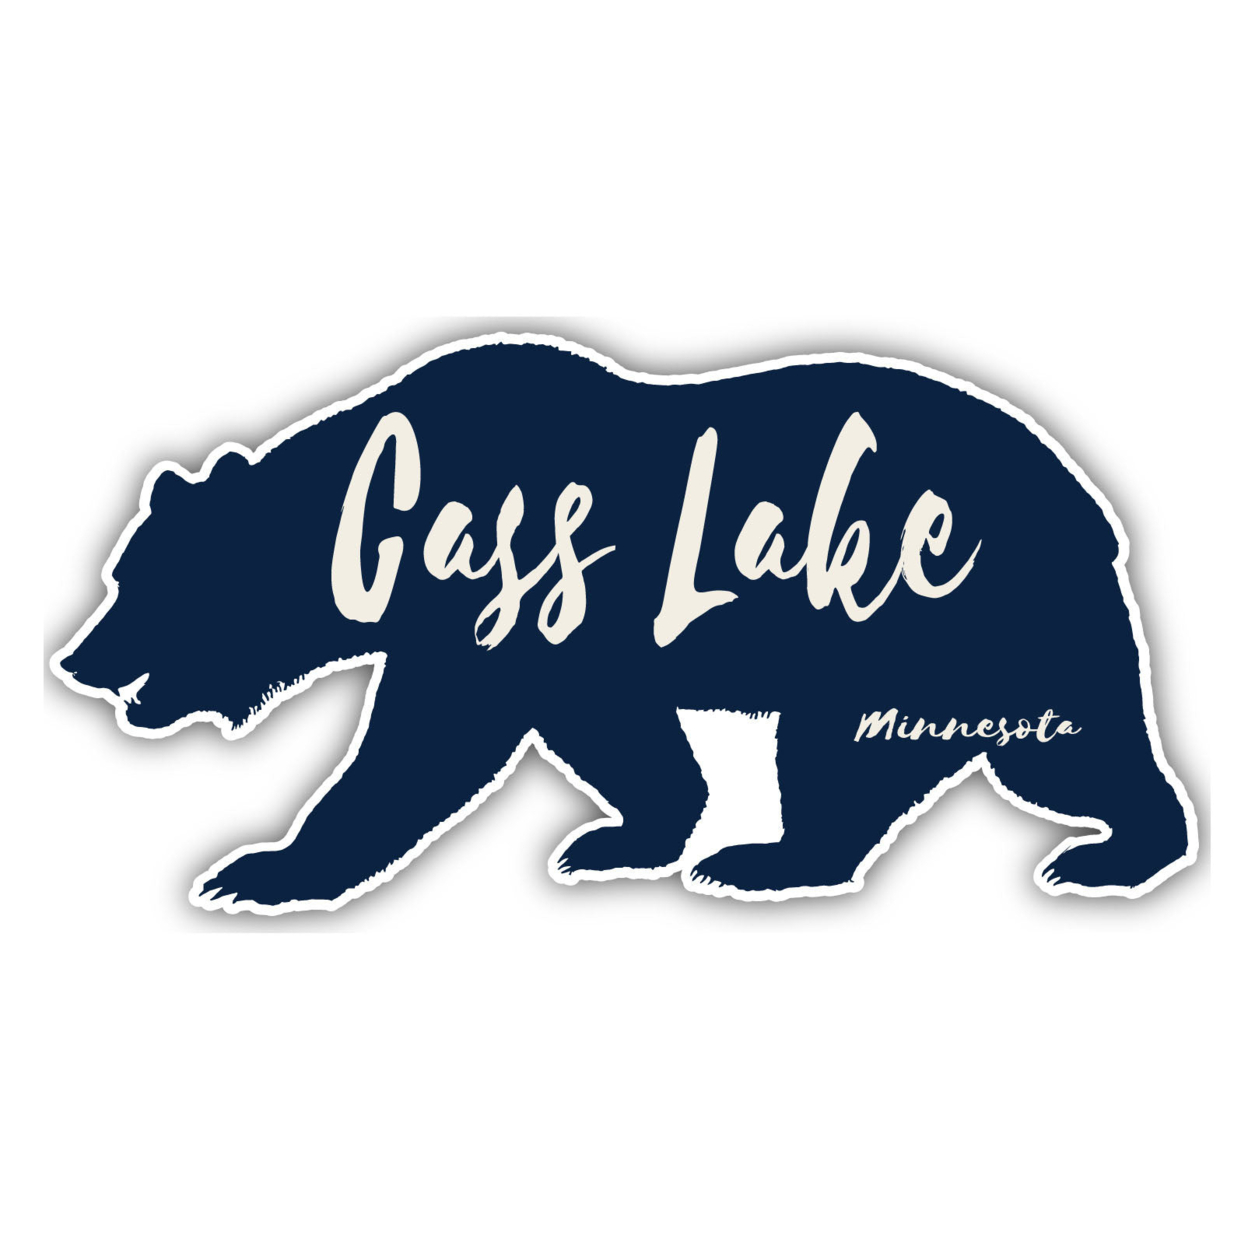 Cass Lake Minnesota Souvenir Decorative Stickers (Choose Theme And Size) - 4-Pack, 4-Inch, Tent